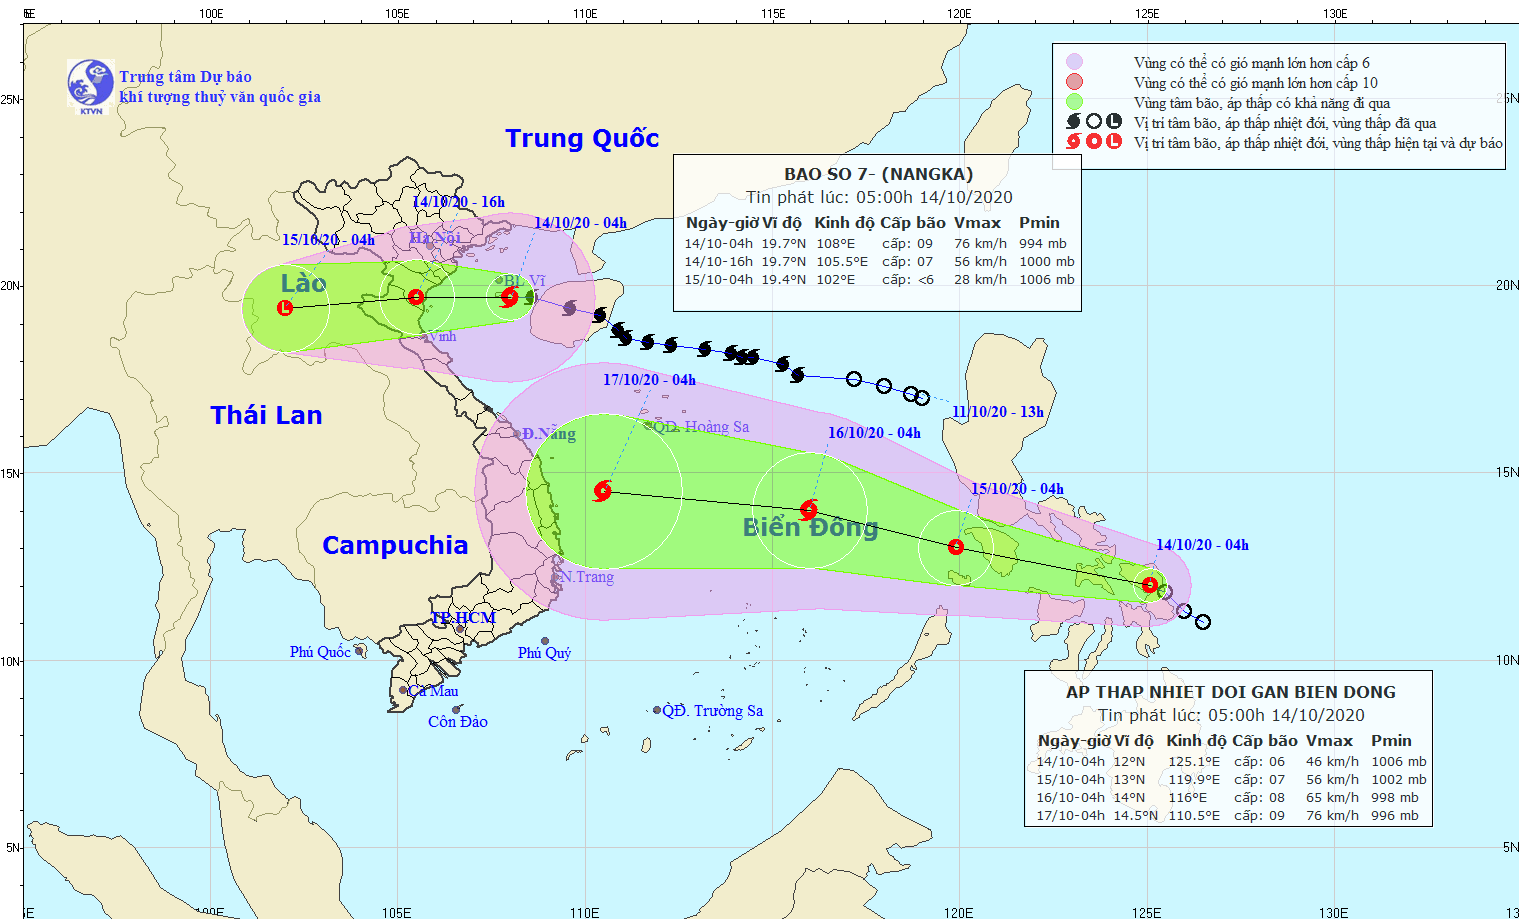 Path map of typhoon Nangka and newly-formed tropical depression